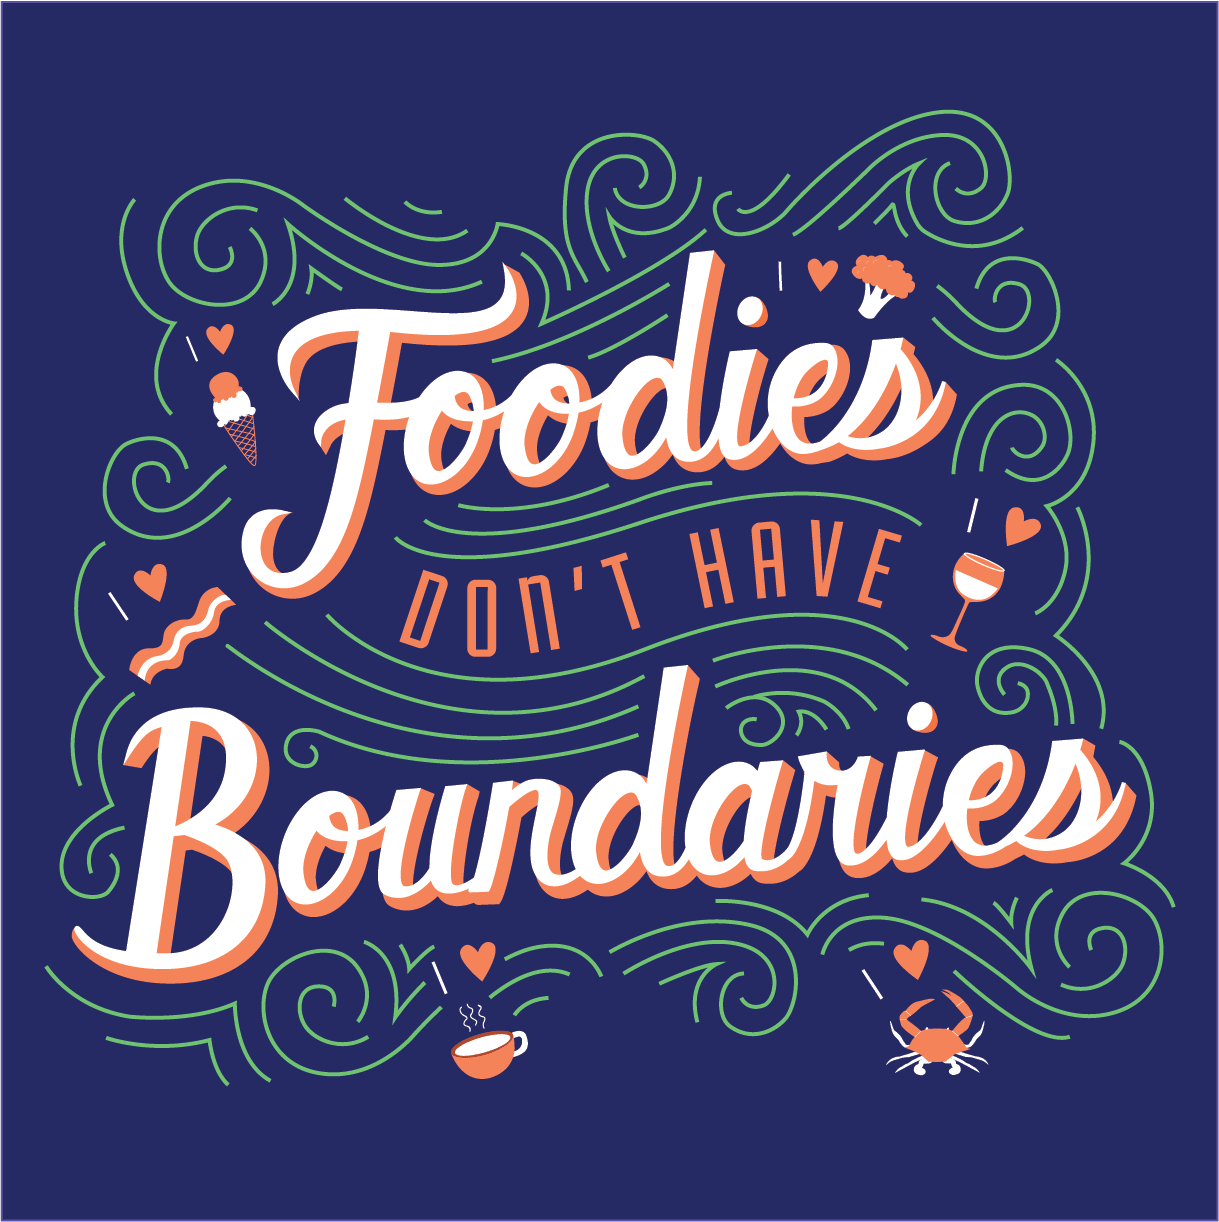 Foodies don't have boundries lettering